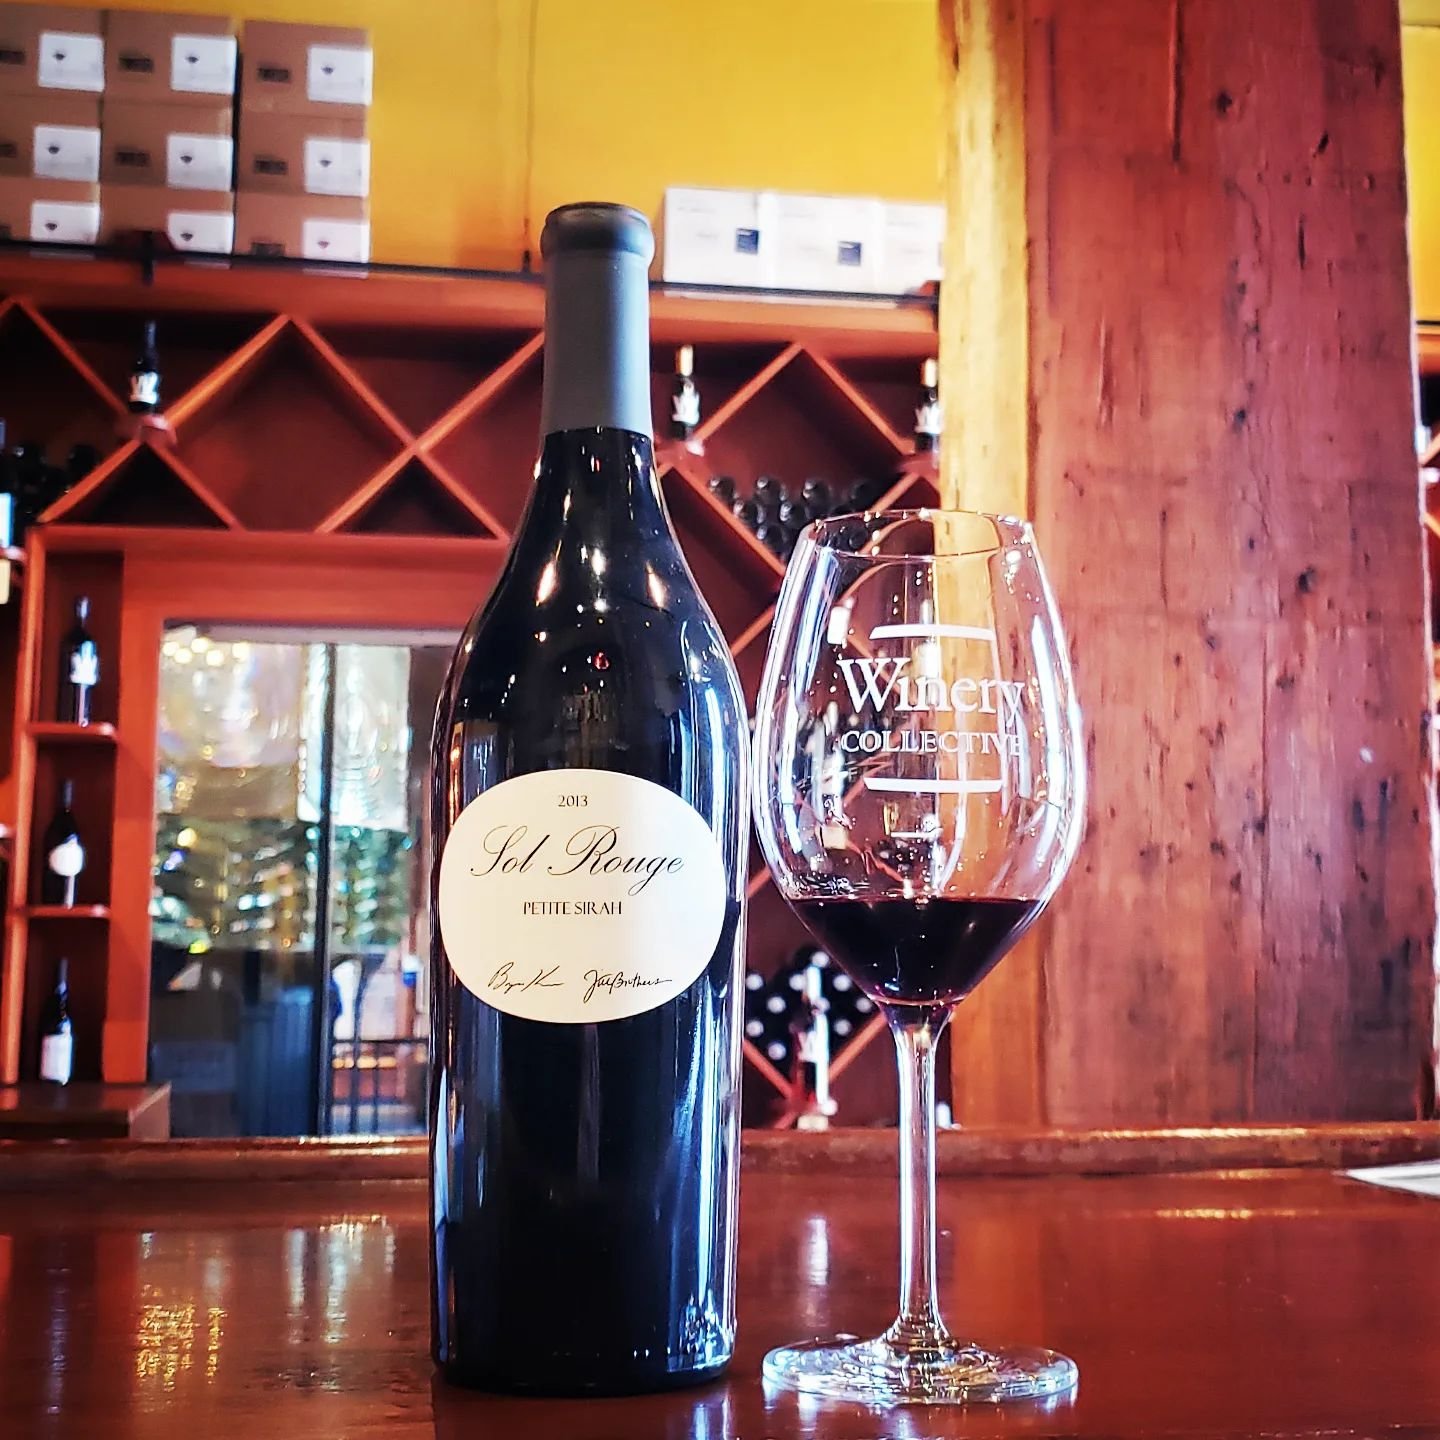 🍇Petite Syrah 2013
📍Sol Rouge, Lake County CA
Notes: A bouquet of blueberries, plums,black cherries and sweet spice rises up from a glass.
Fire oak,clove and dusty earth on the palate.
Only 75 cases produced.

#winerycollectivesf #fishermanswharf #